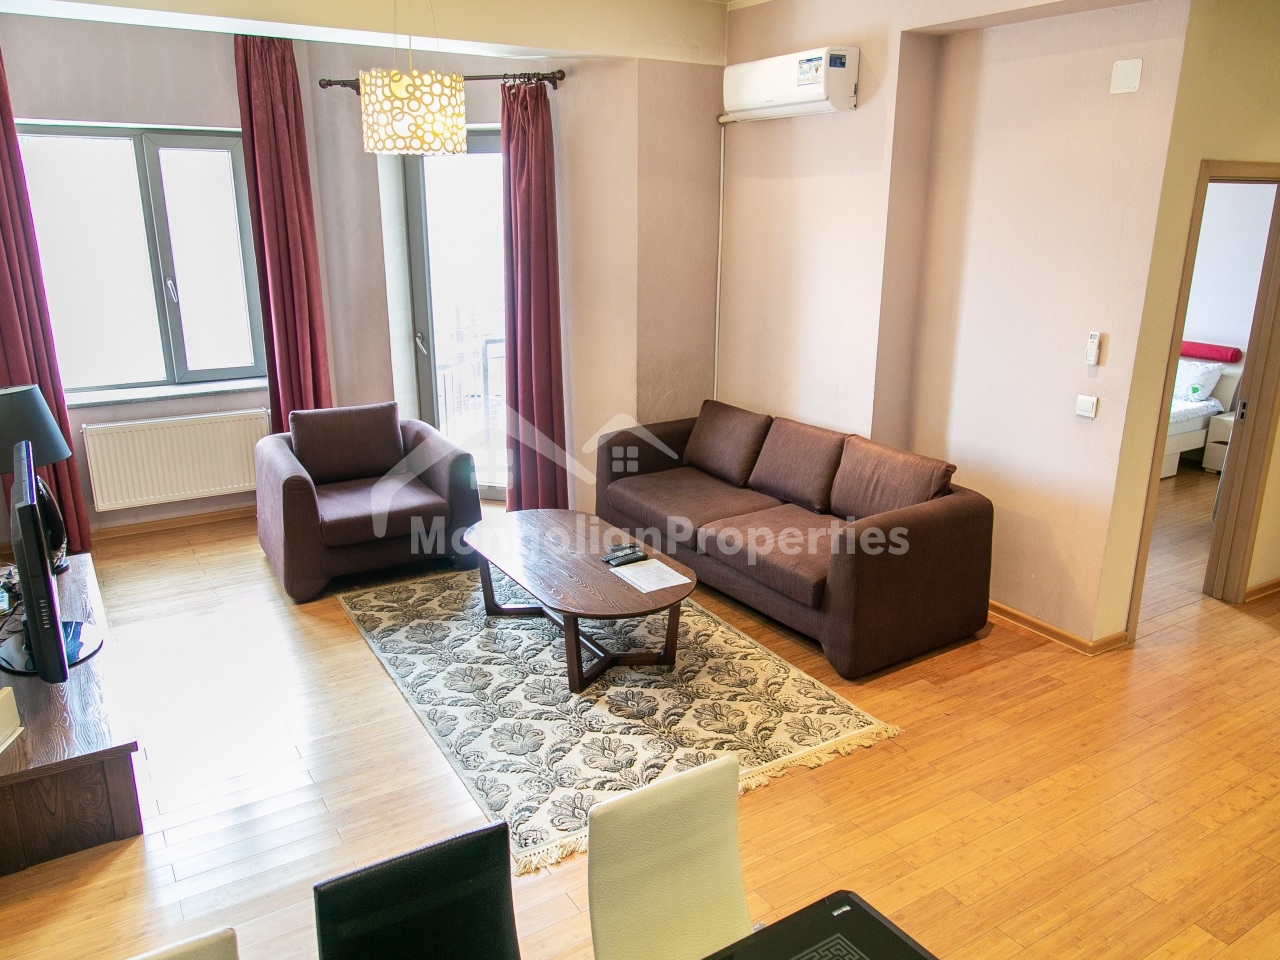 FOR SALE: 2-BEDROOM APARTMENT AT REGENCY RESIDENCE